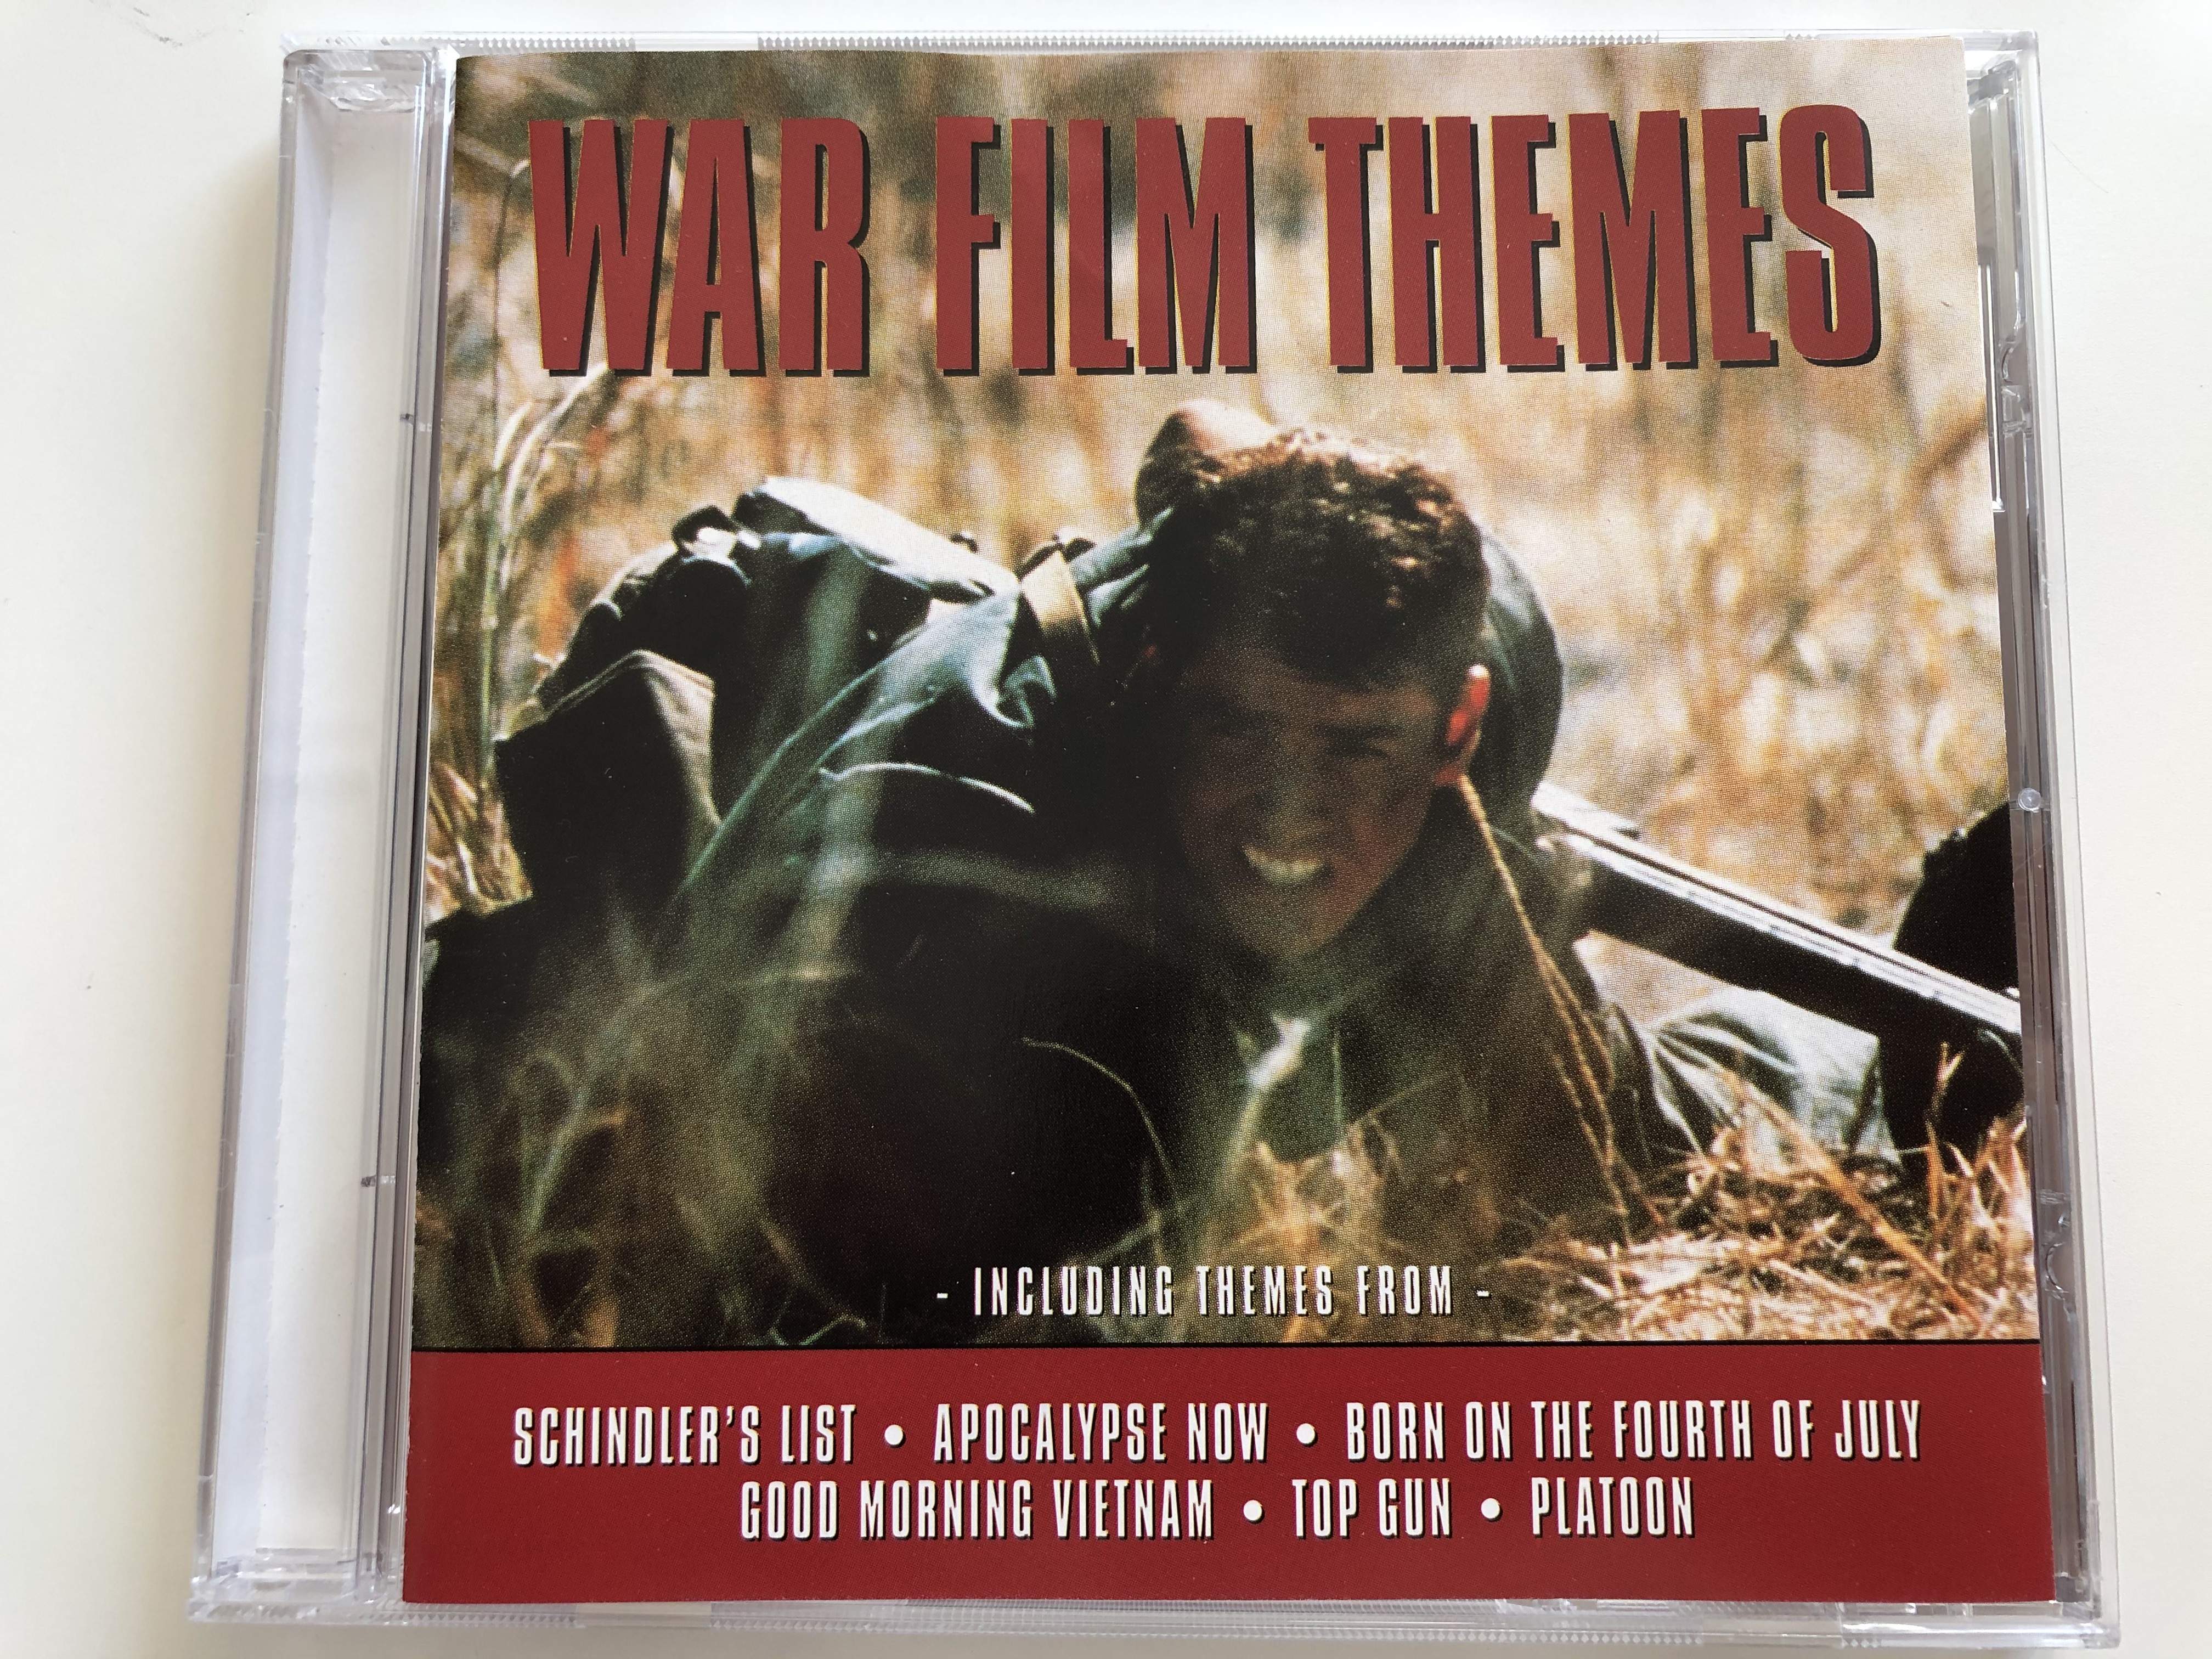 war-film-themes-including-themes-from-schindler-s-list-apocalypse-now-born-on-the-fourth-of-july-good-morning-vietnam-top-gun-platon-castle-communications-audio-cd-1995-mac-cd-278-1-.jpg